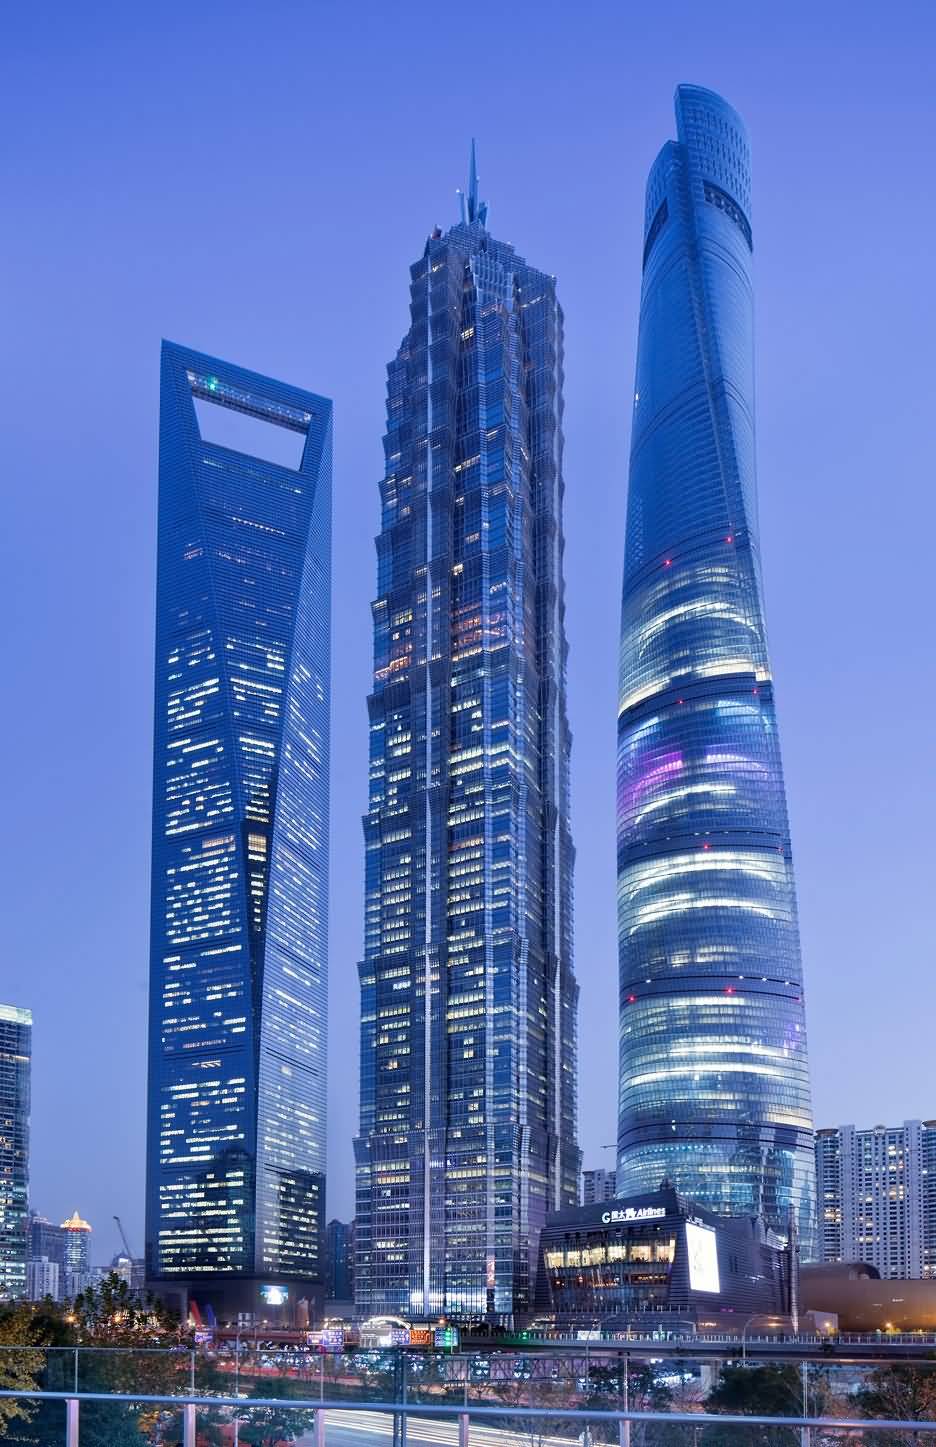 Night View Of The Shanghai Tower